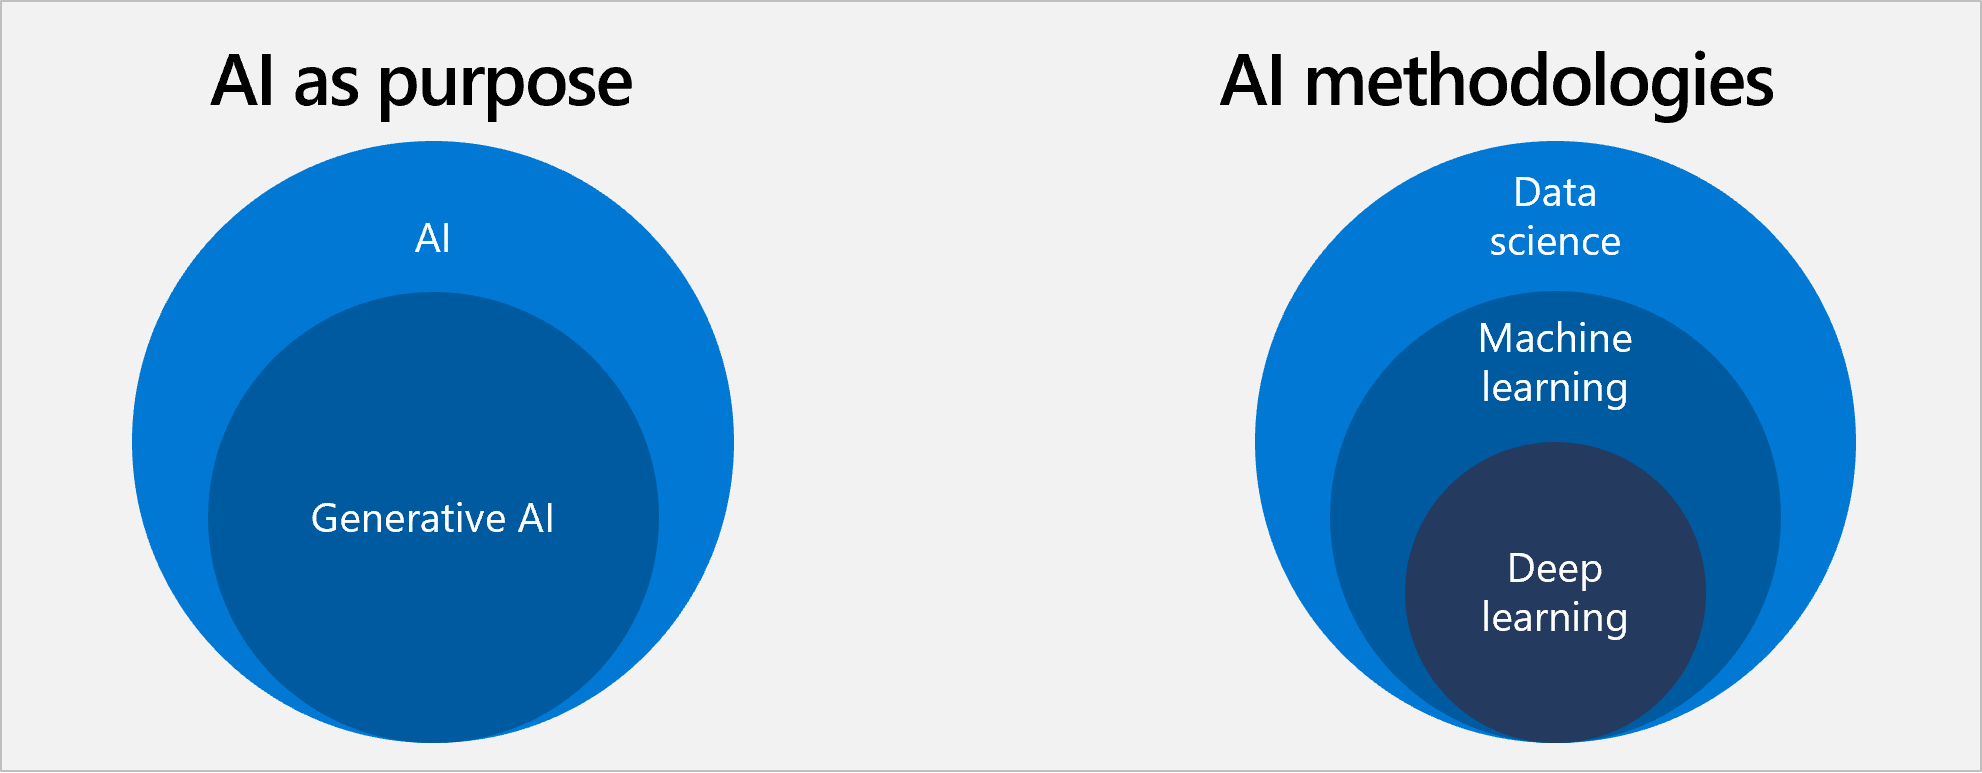 A screenshot of a graph showing AI methodologies (deep learning, machine learning, and data science) and AI as purpose (AI and generative AI).